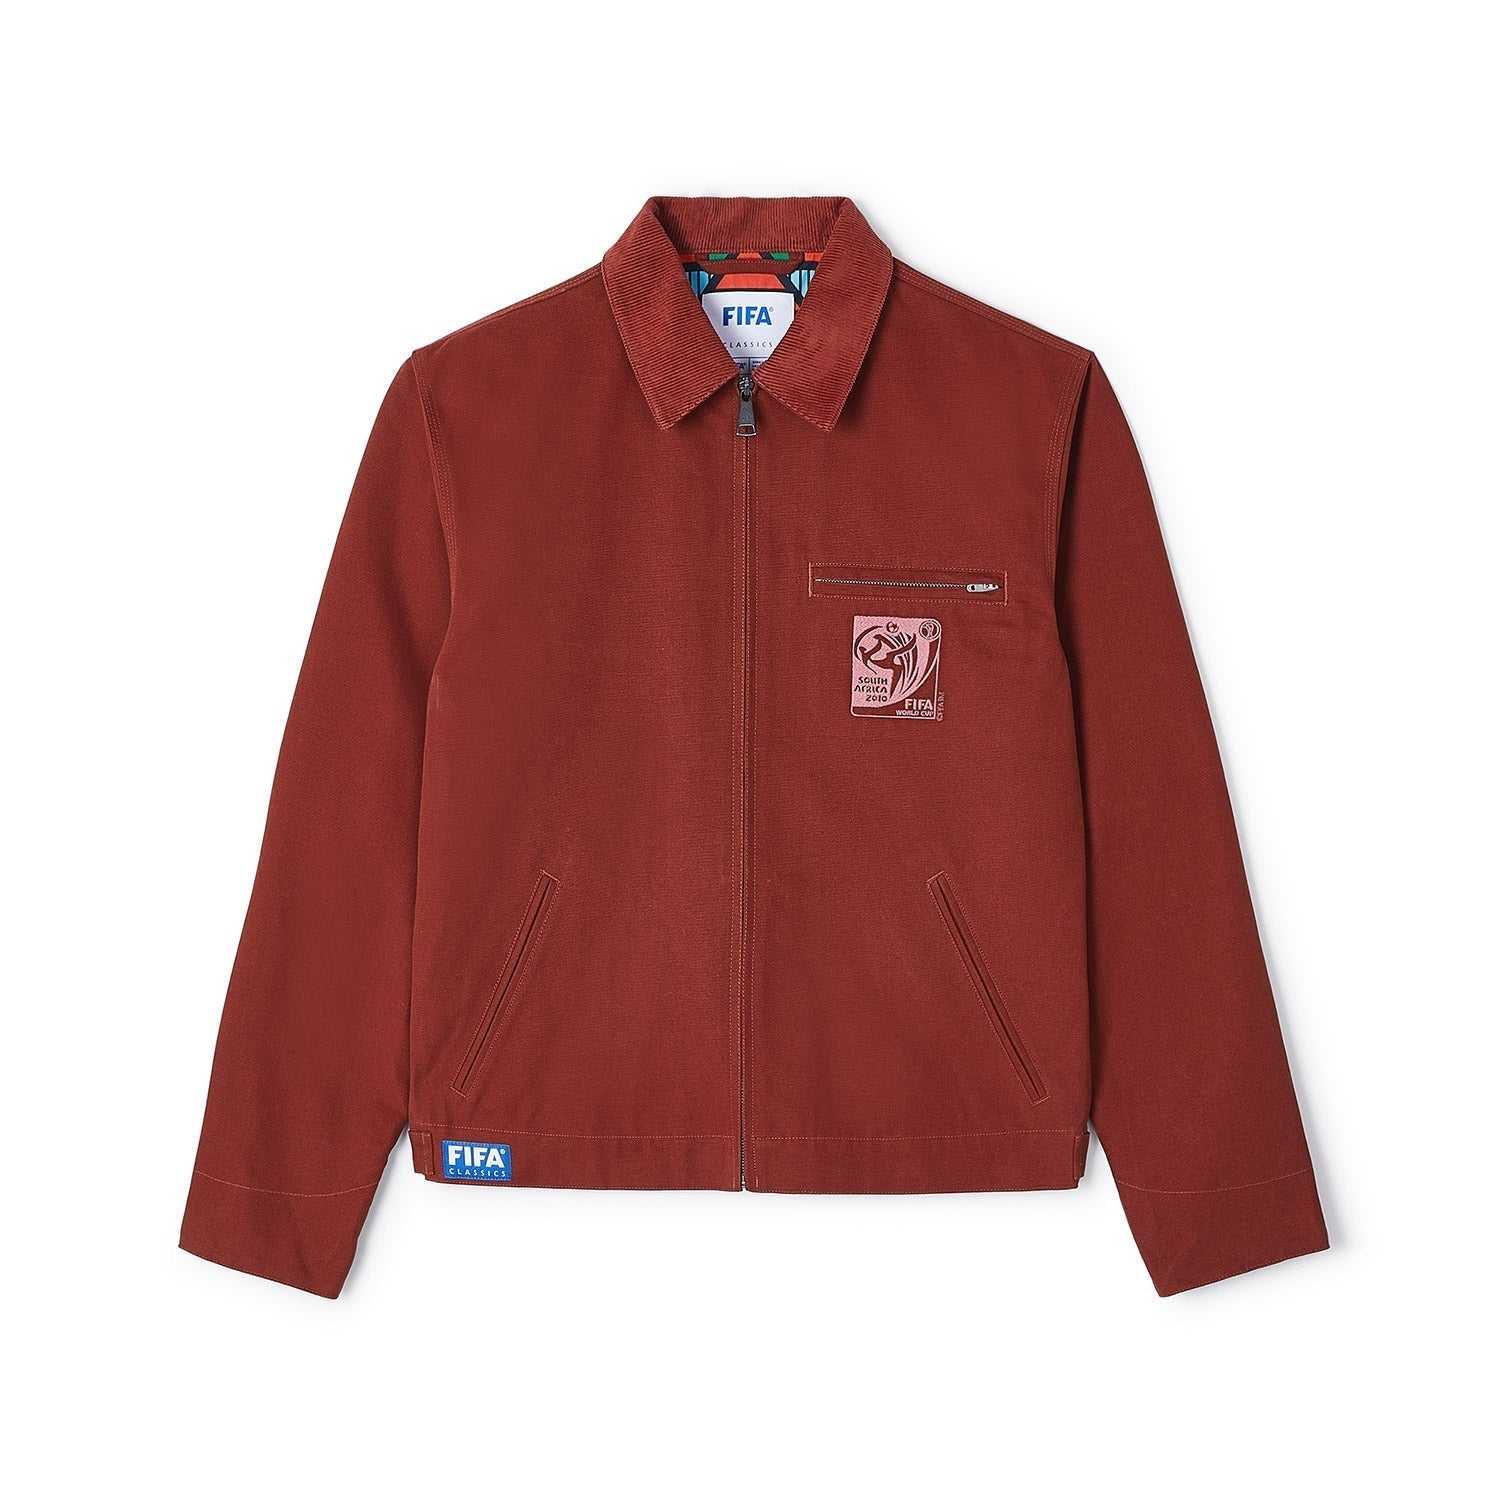 FIFA Rewind South Africa '10 Red Jacket - Men's